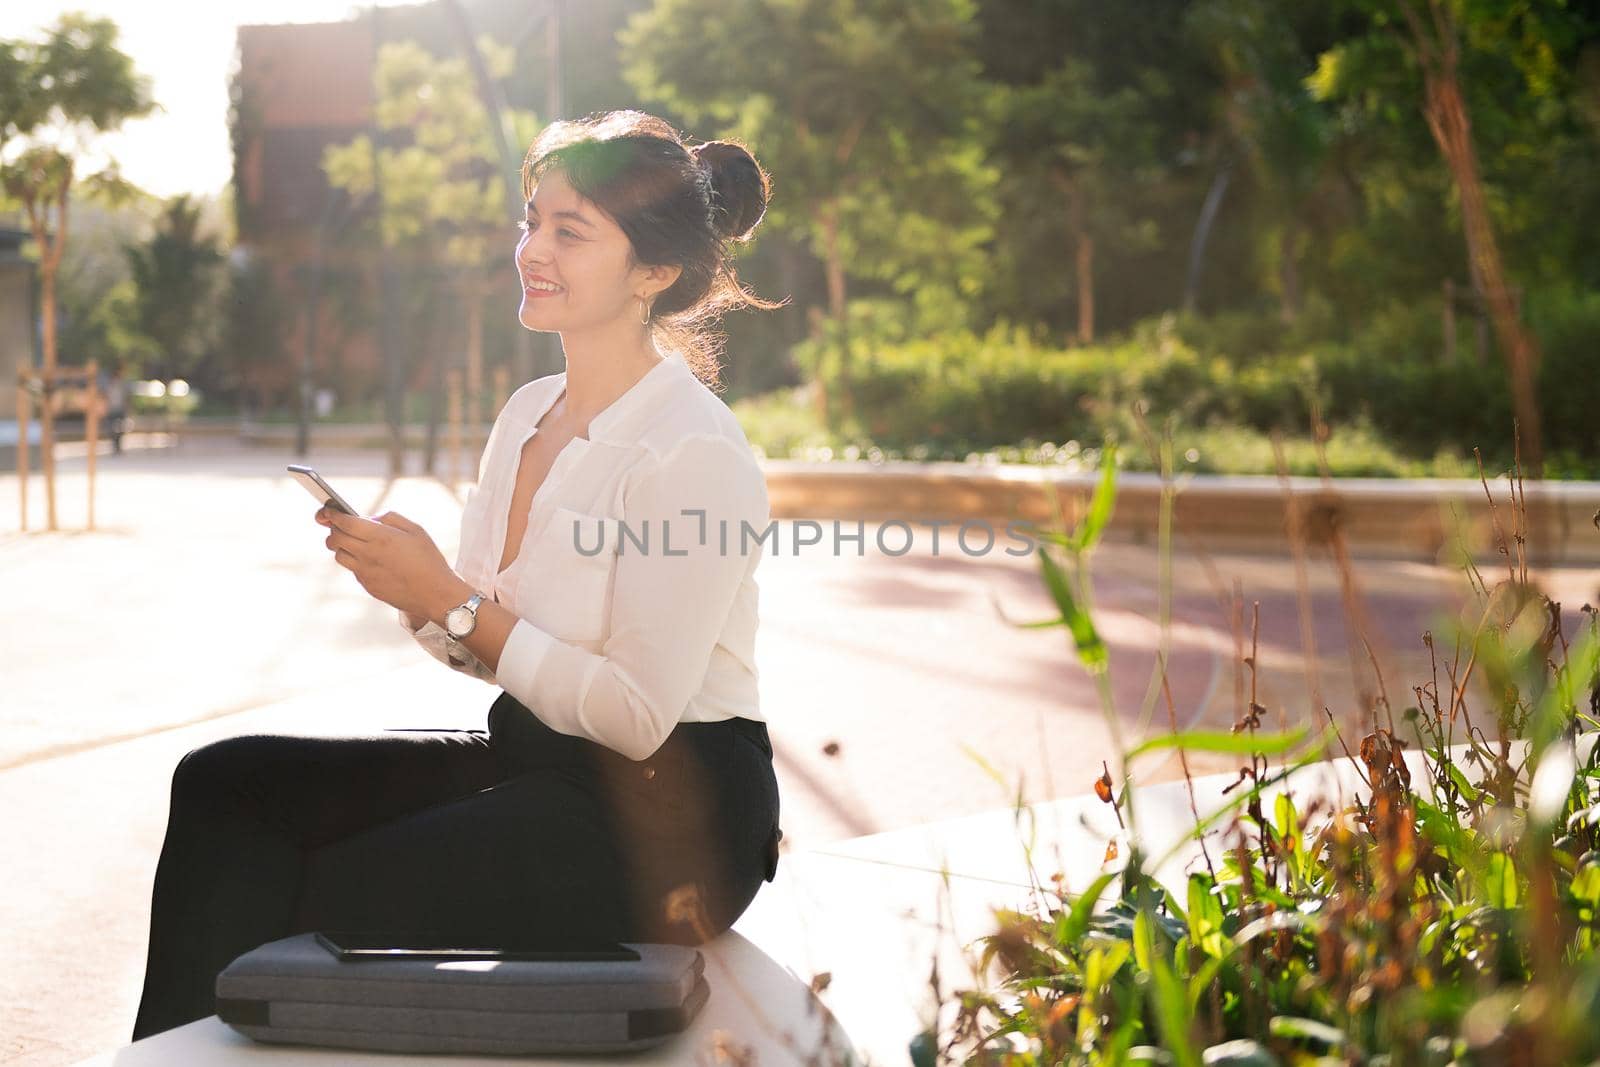 smiling businesswoman checking her phone at sunrise sitting in a park in the financial district, concept of digital entrepreneur and urban lifestyle, copy space for text